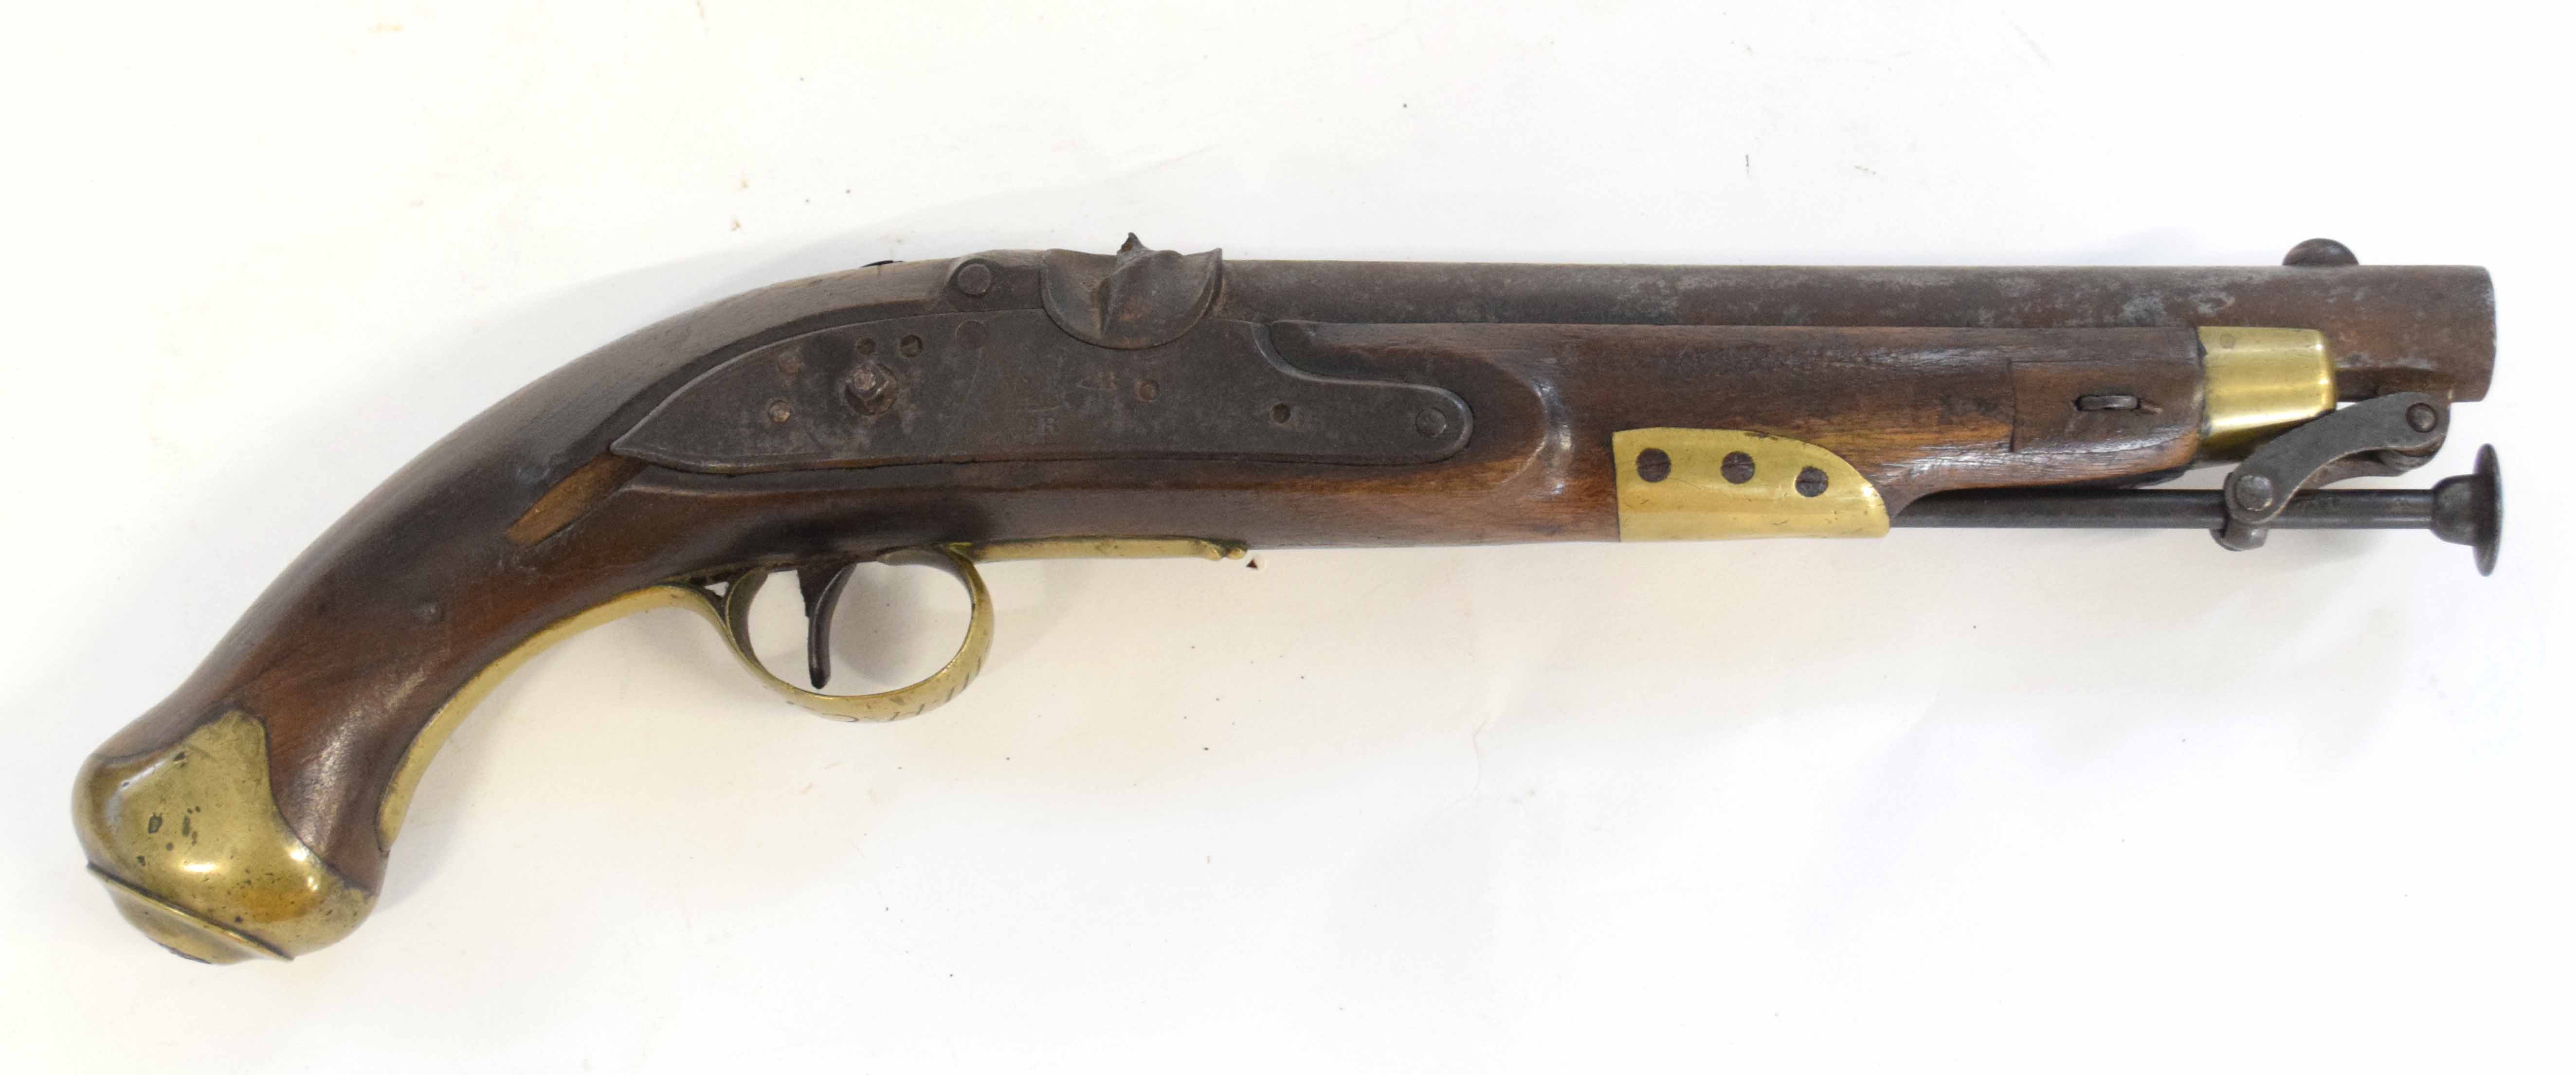 Two pistols, one Georgian Tower flintlock pistol converted to percussion cap, with brass butt cap, - Image 8 of 8